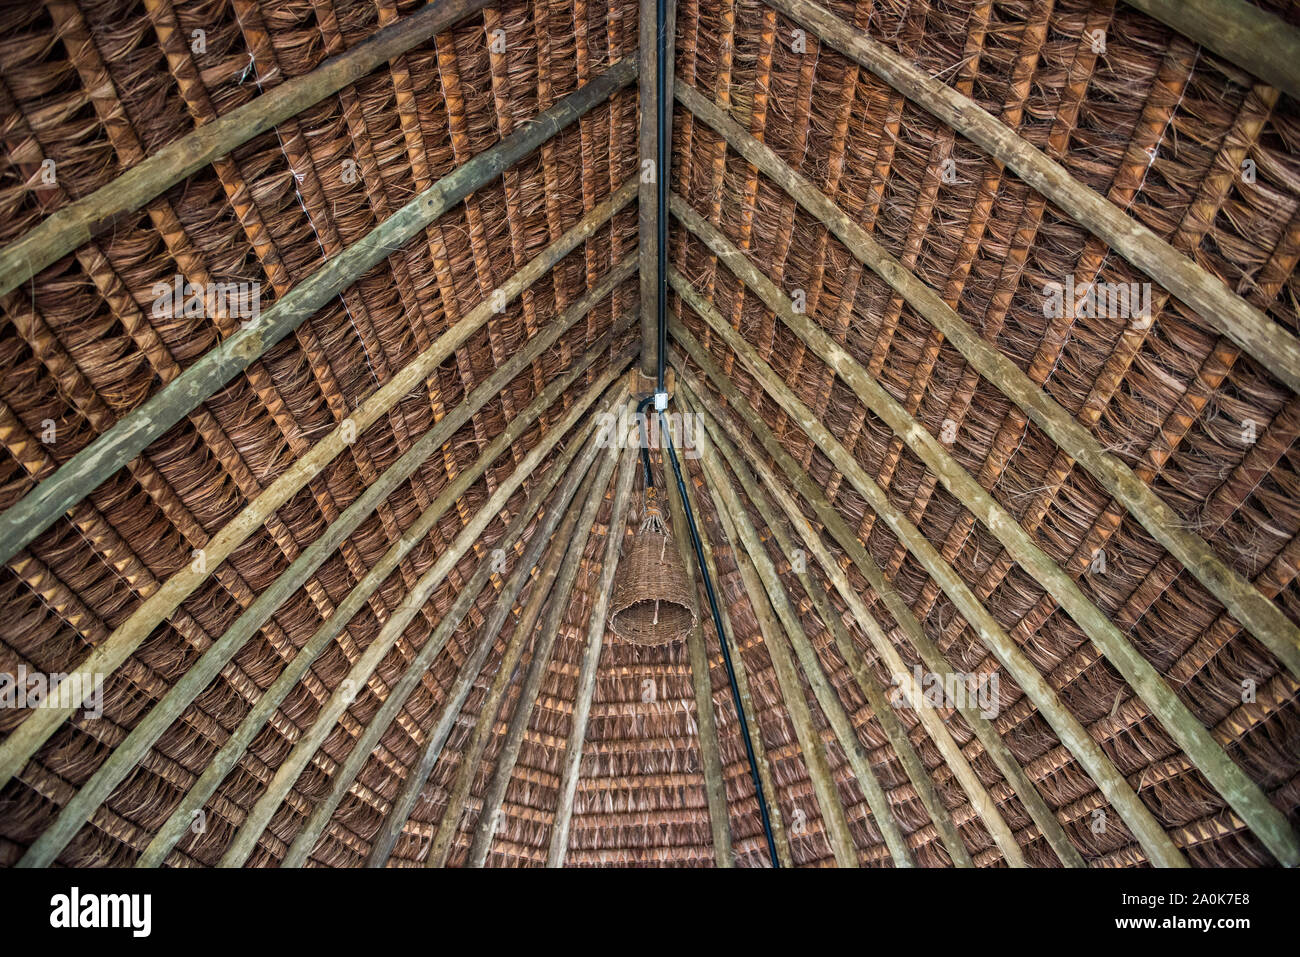 High ceiling, chandelier and roof made of straw Stock Photo